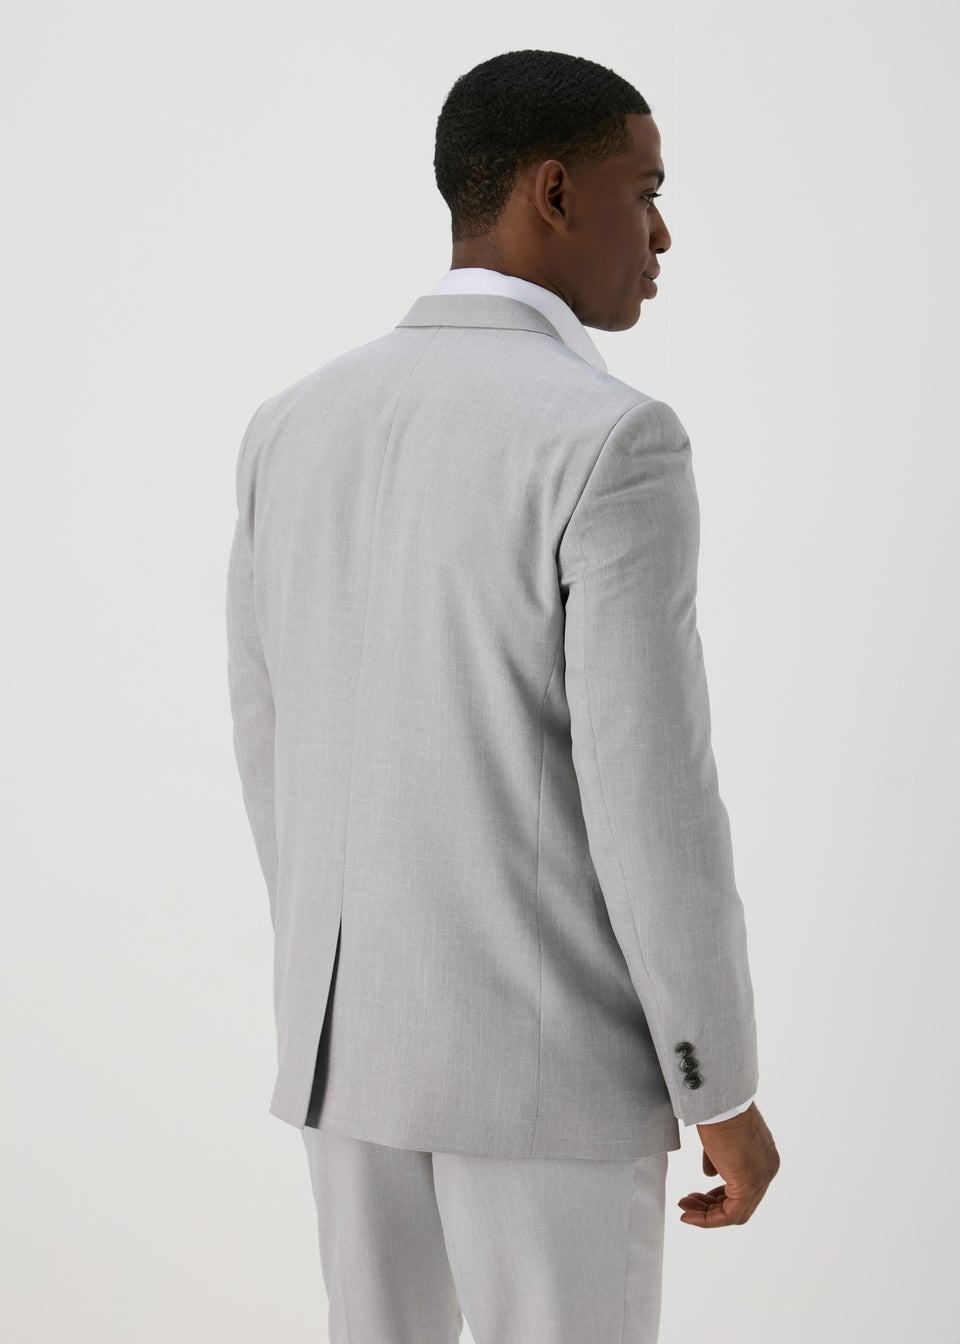 Taylor & Wright Grey Turner Tailored Fit Jacket